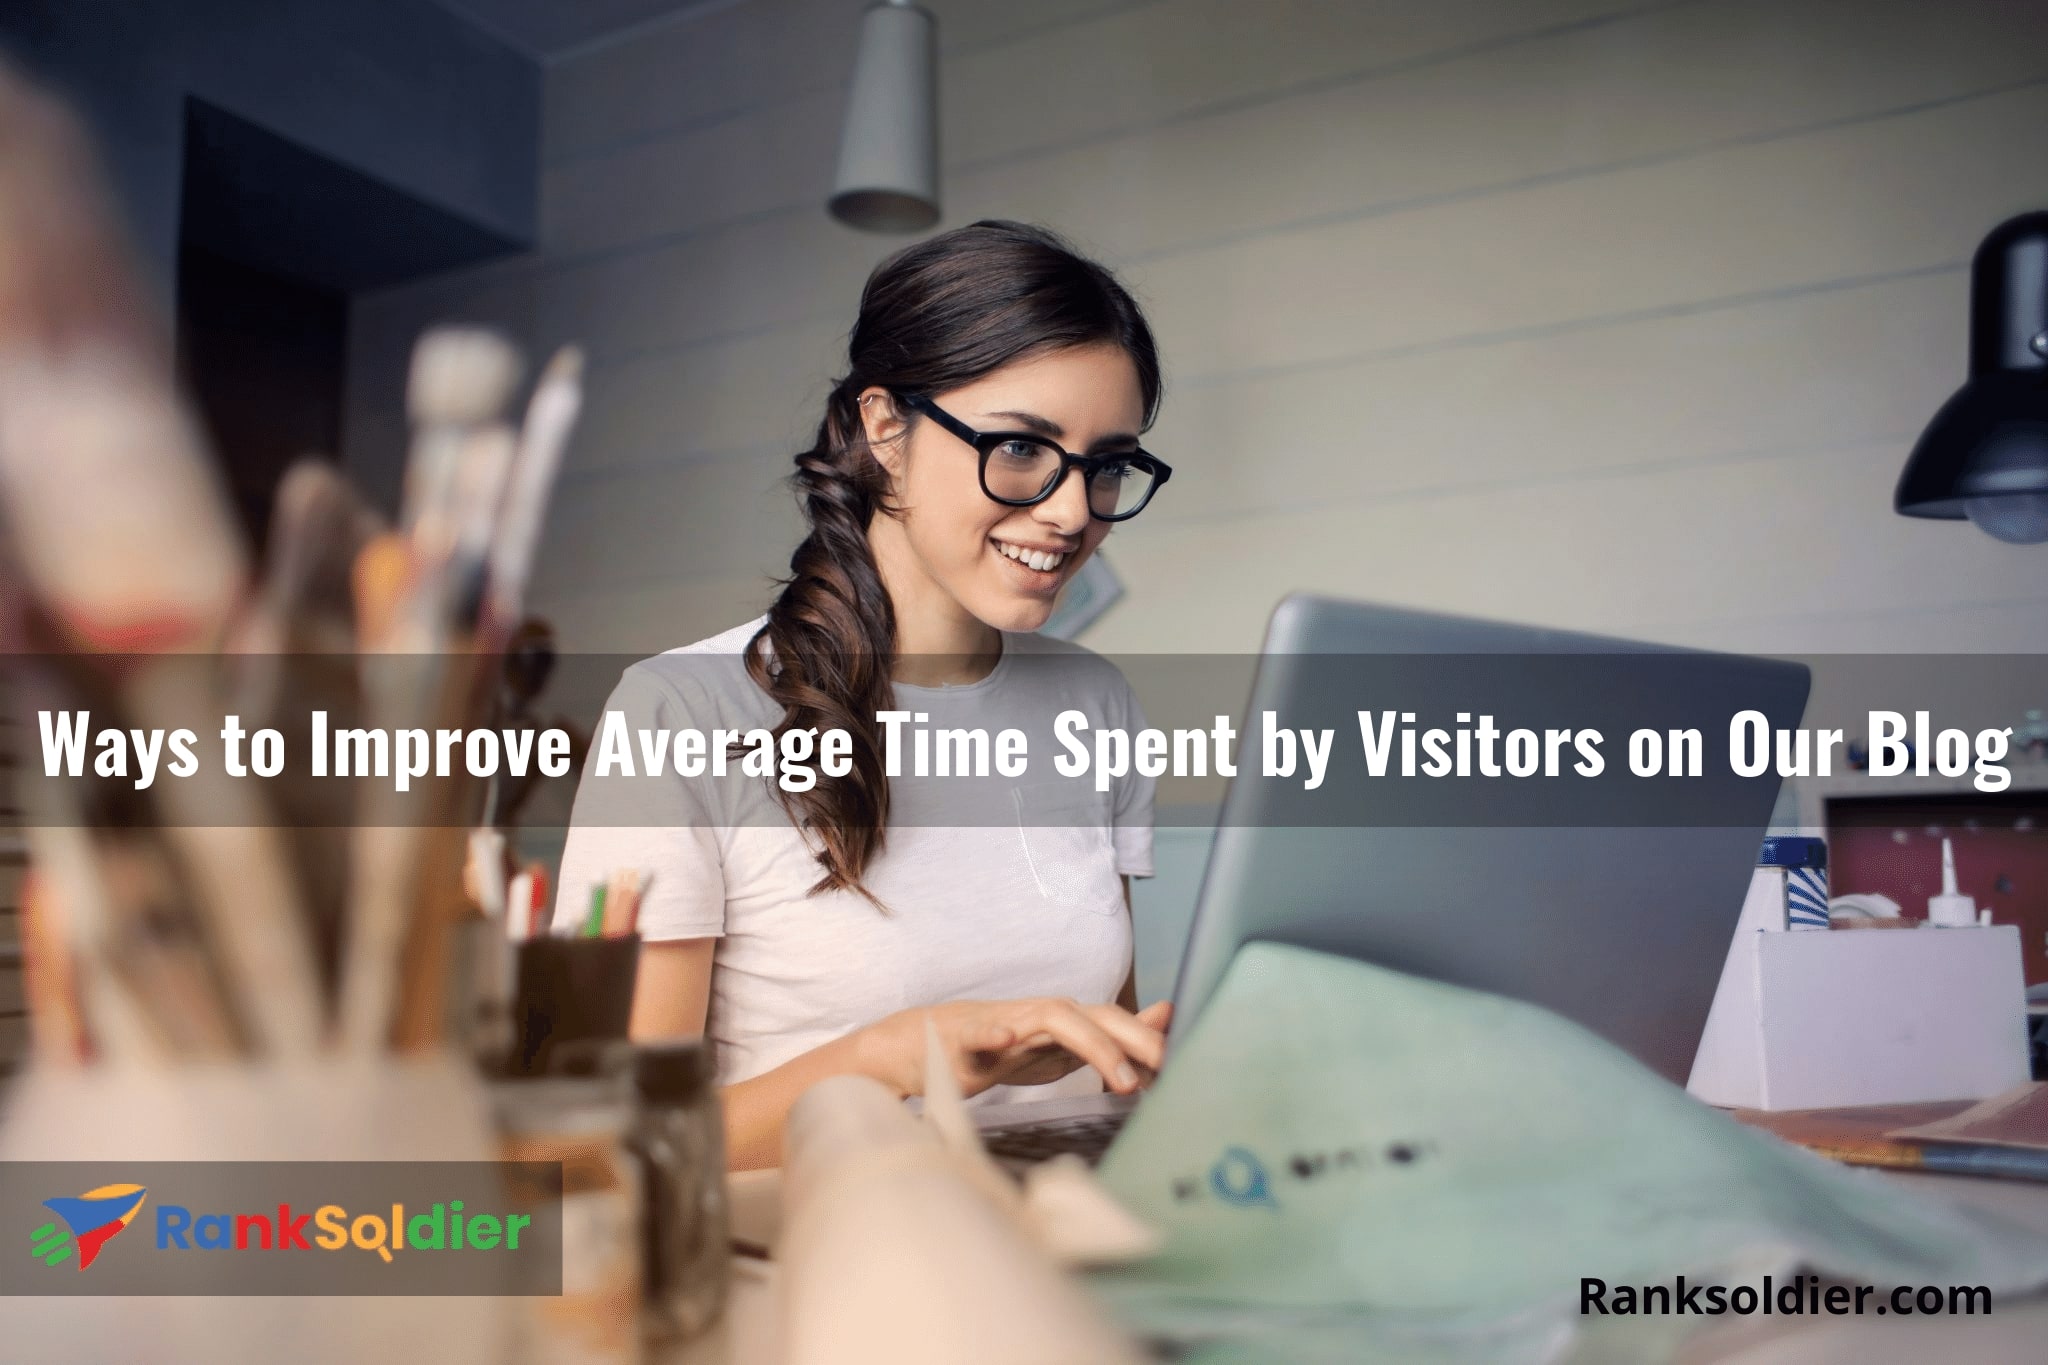 Ways to Improve Average Time Spent by Visitors on Our Blog